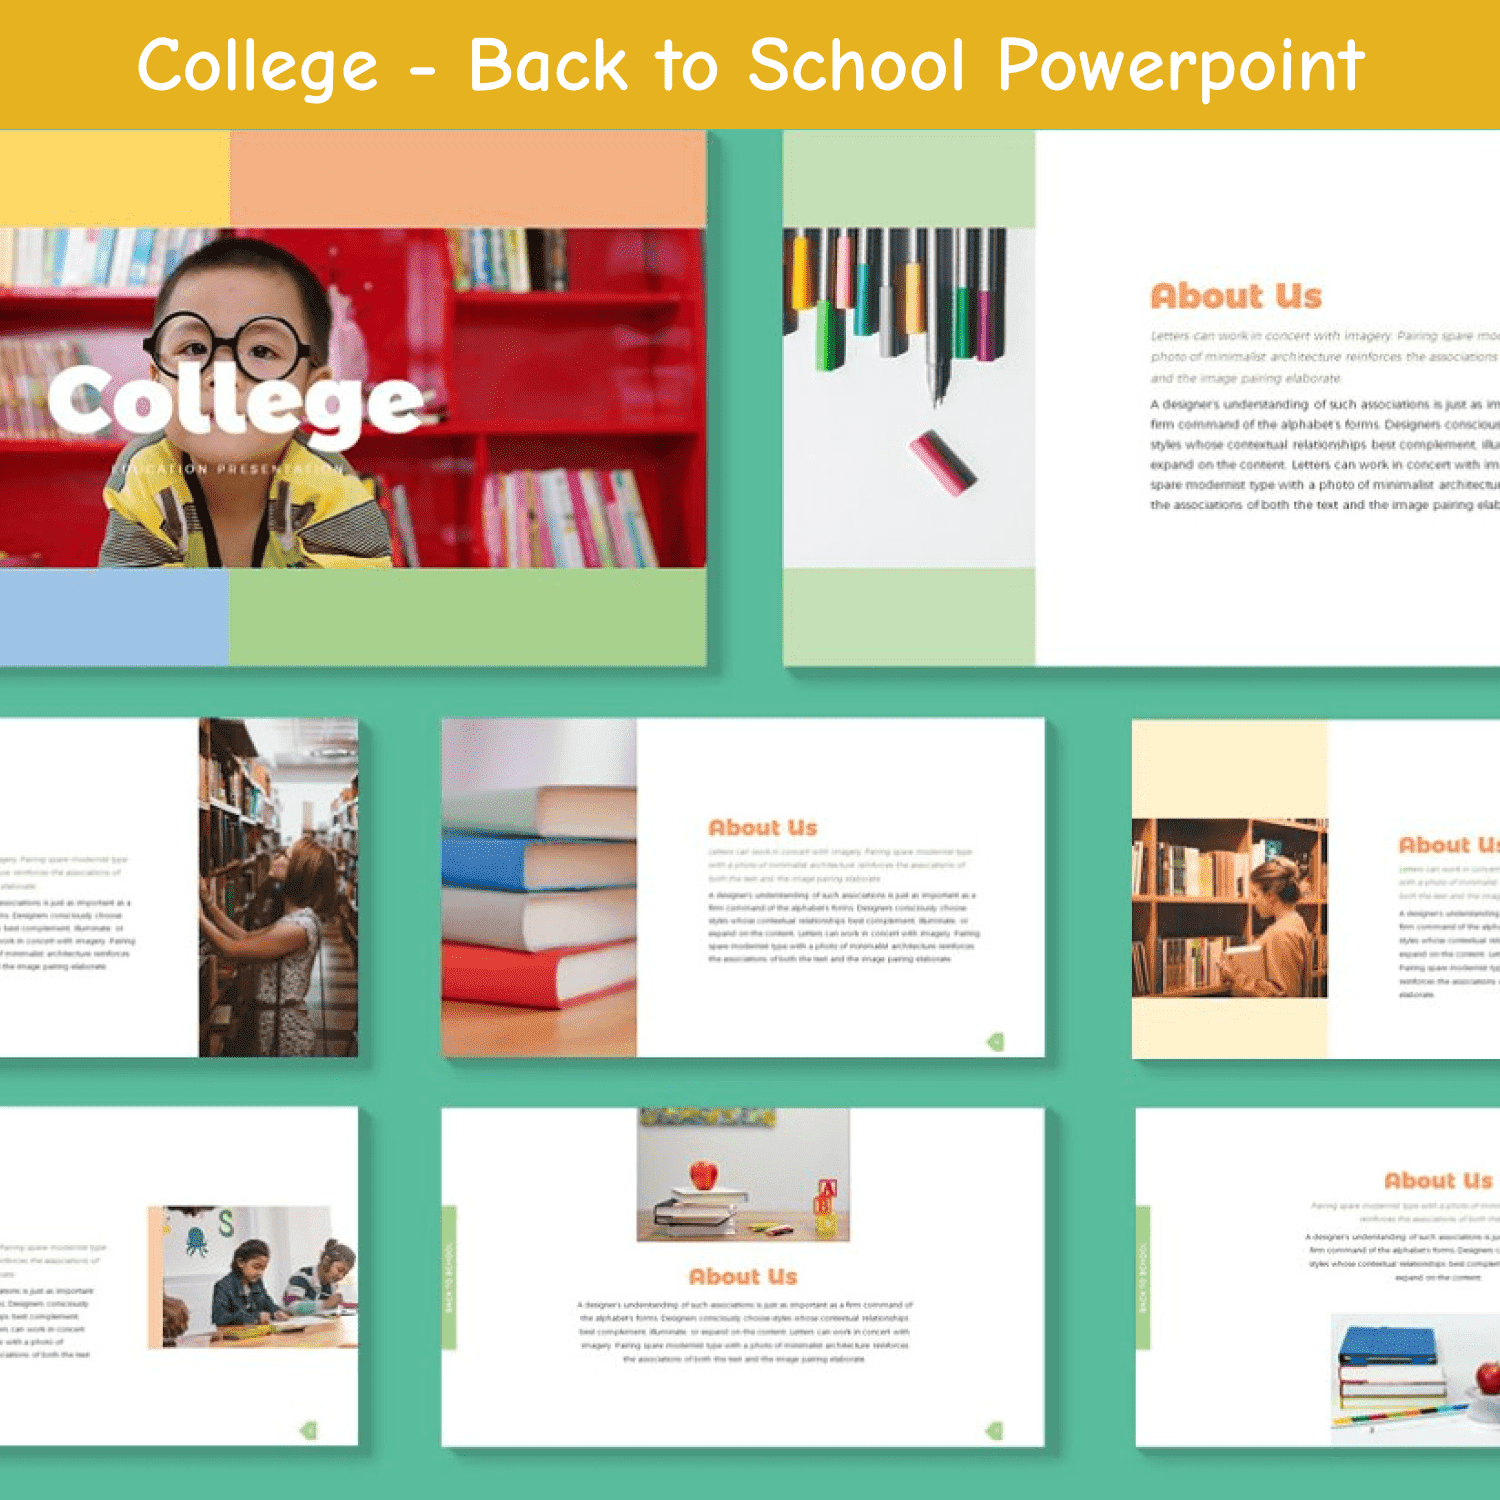 college back to school powerpoint cover image.